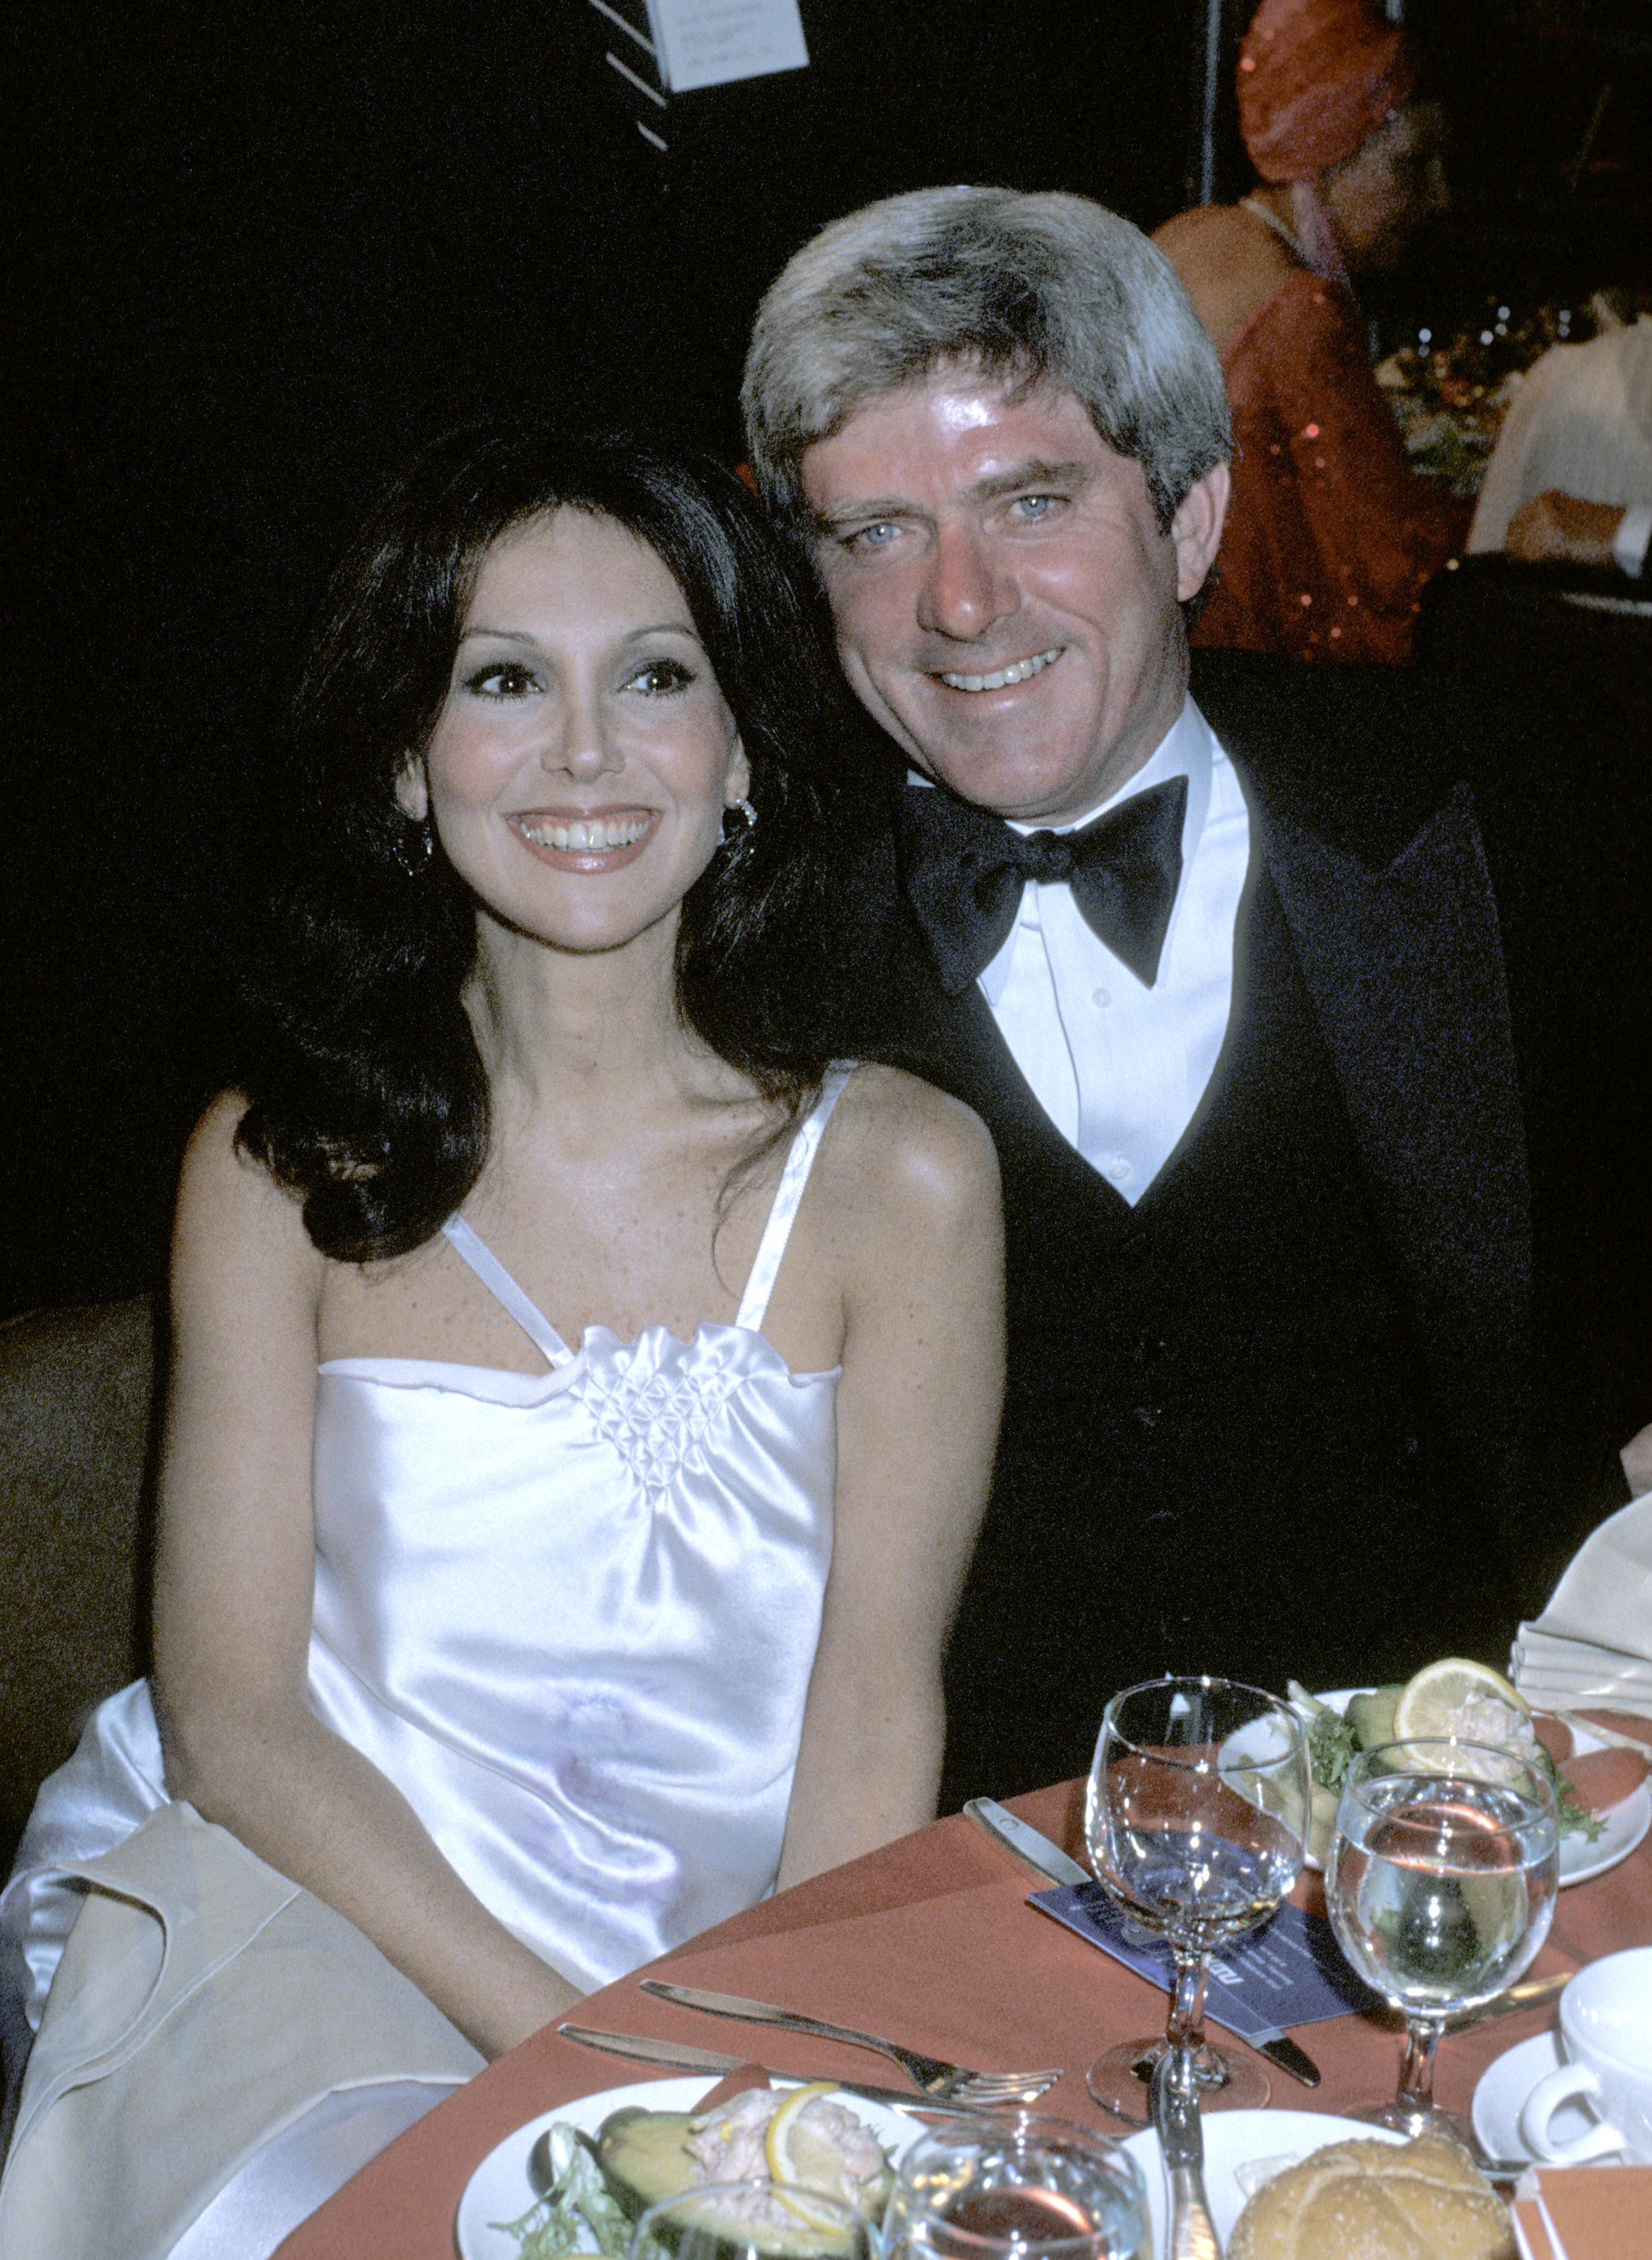 Marlo Thomas and Phil Donahue at the Iris Awards Banquet on March 4, 1978 | Source: Getty Images